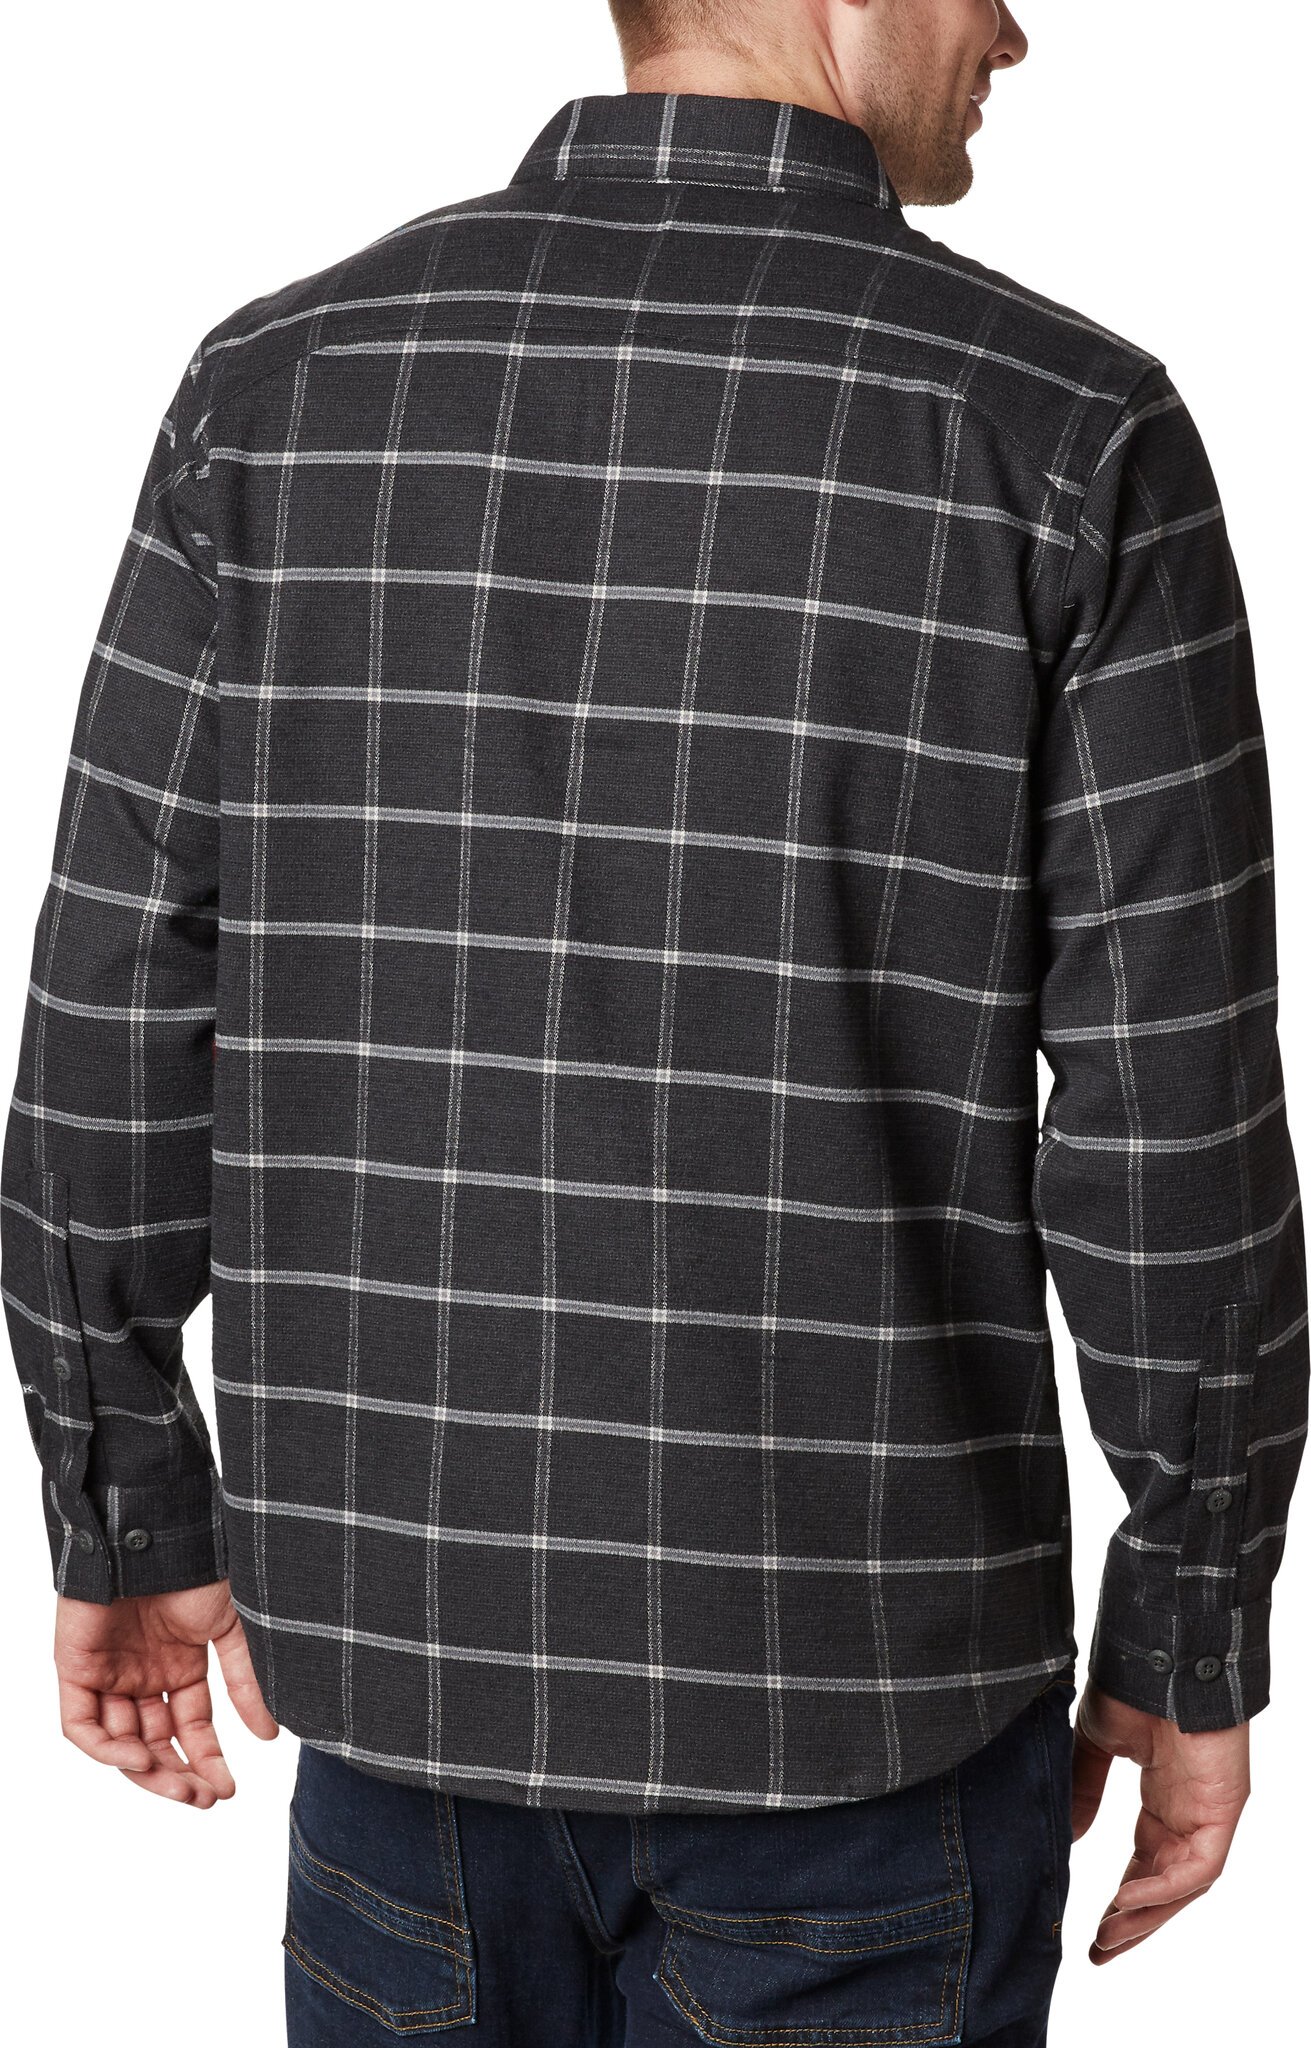 Columbia Outdoor Elements Stretch Flannel Shirt - Men's